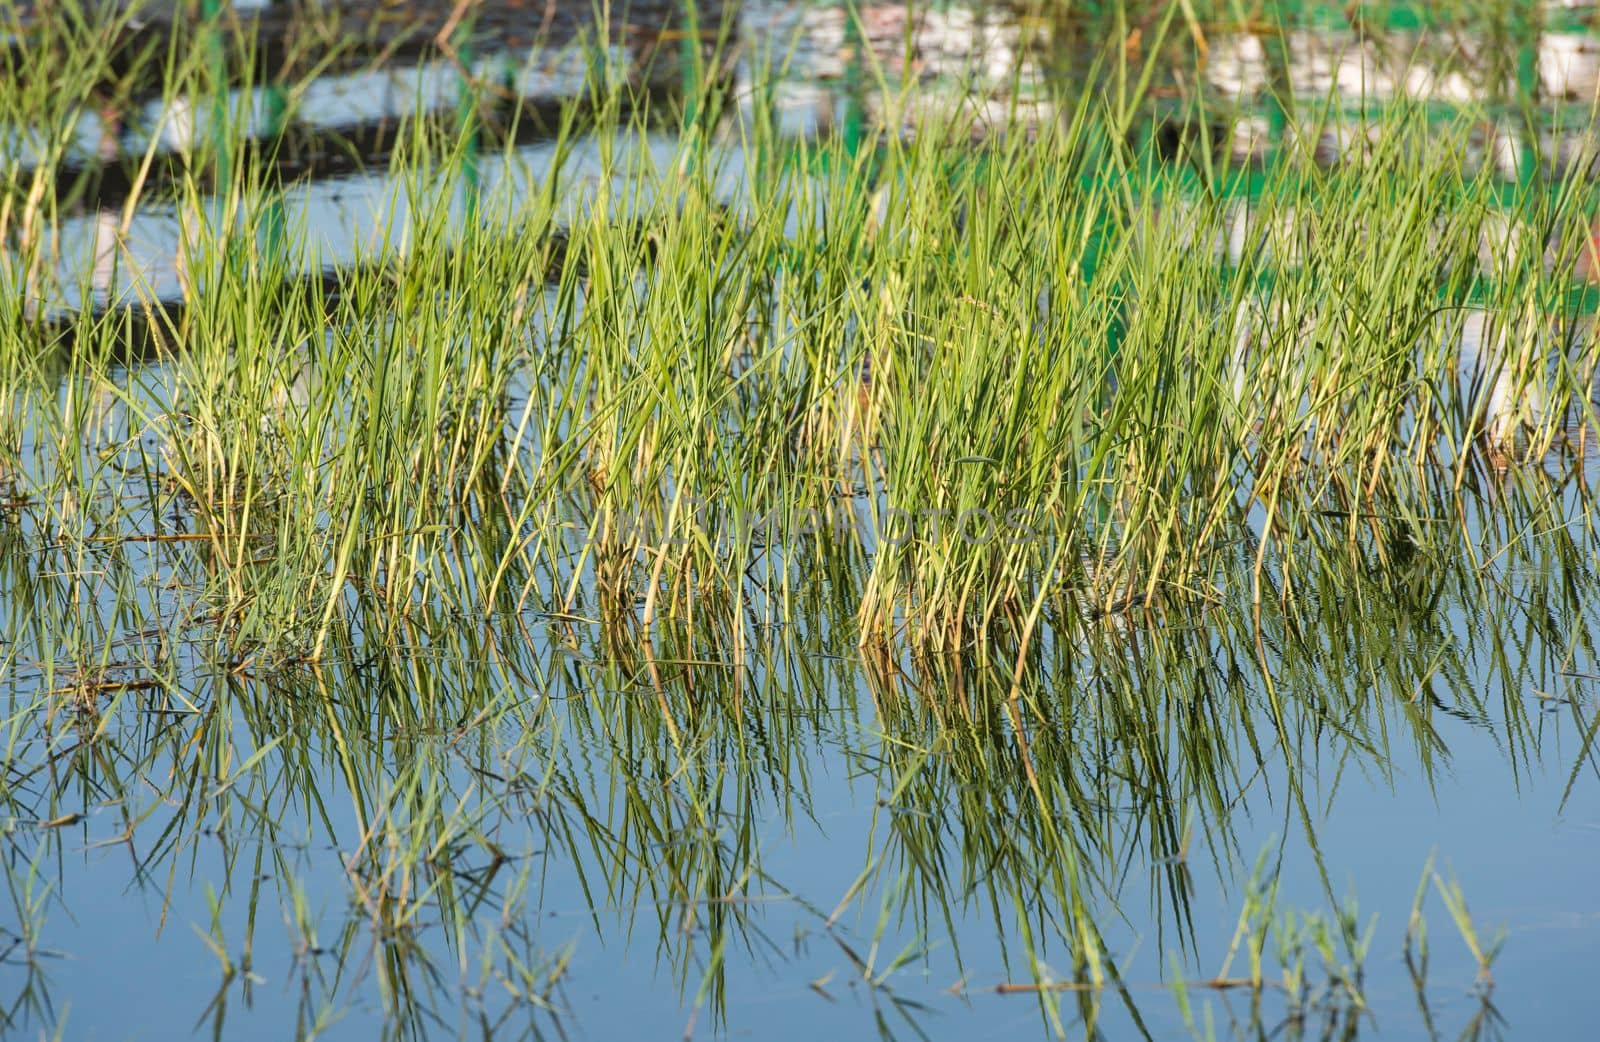 Closeup detail of grass reeds in water of riverbank with abstract reflection